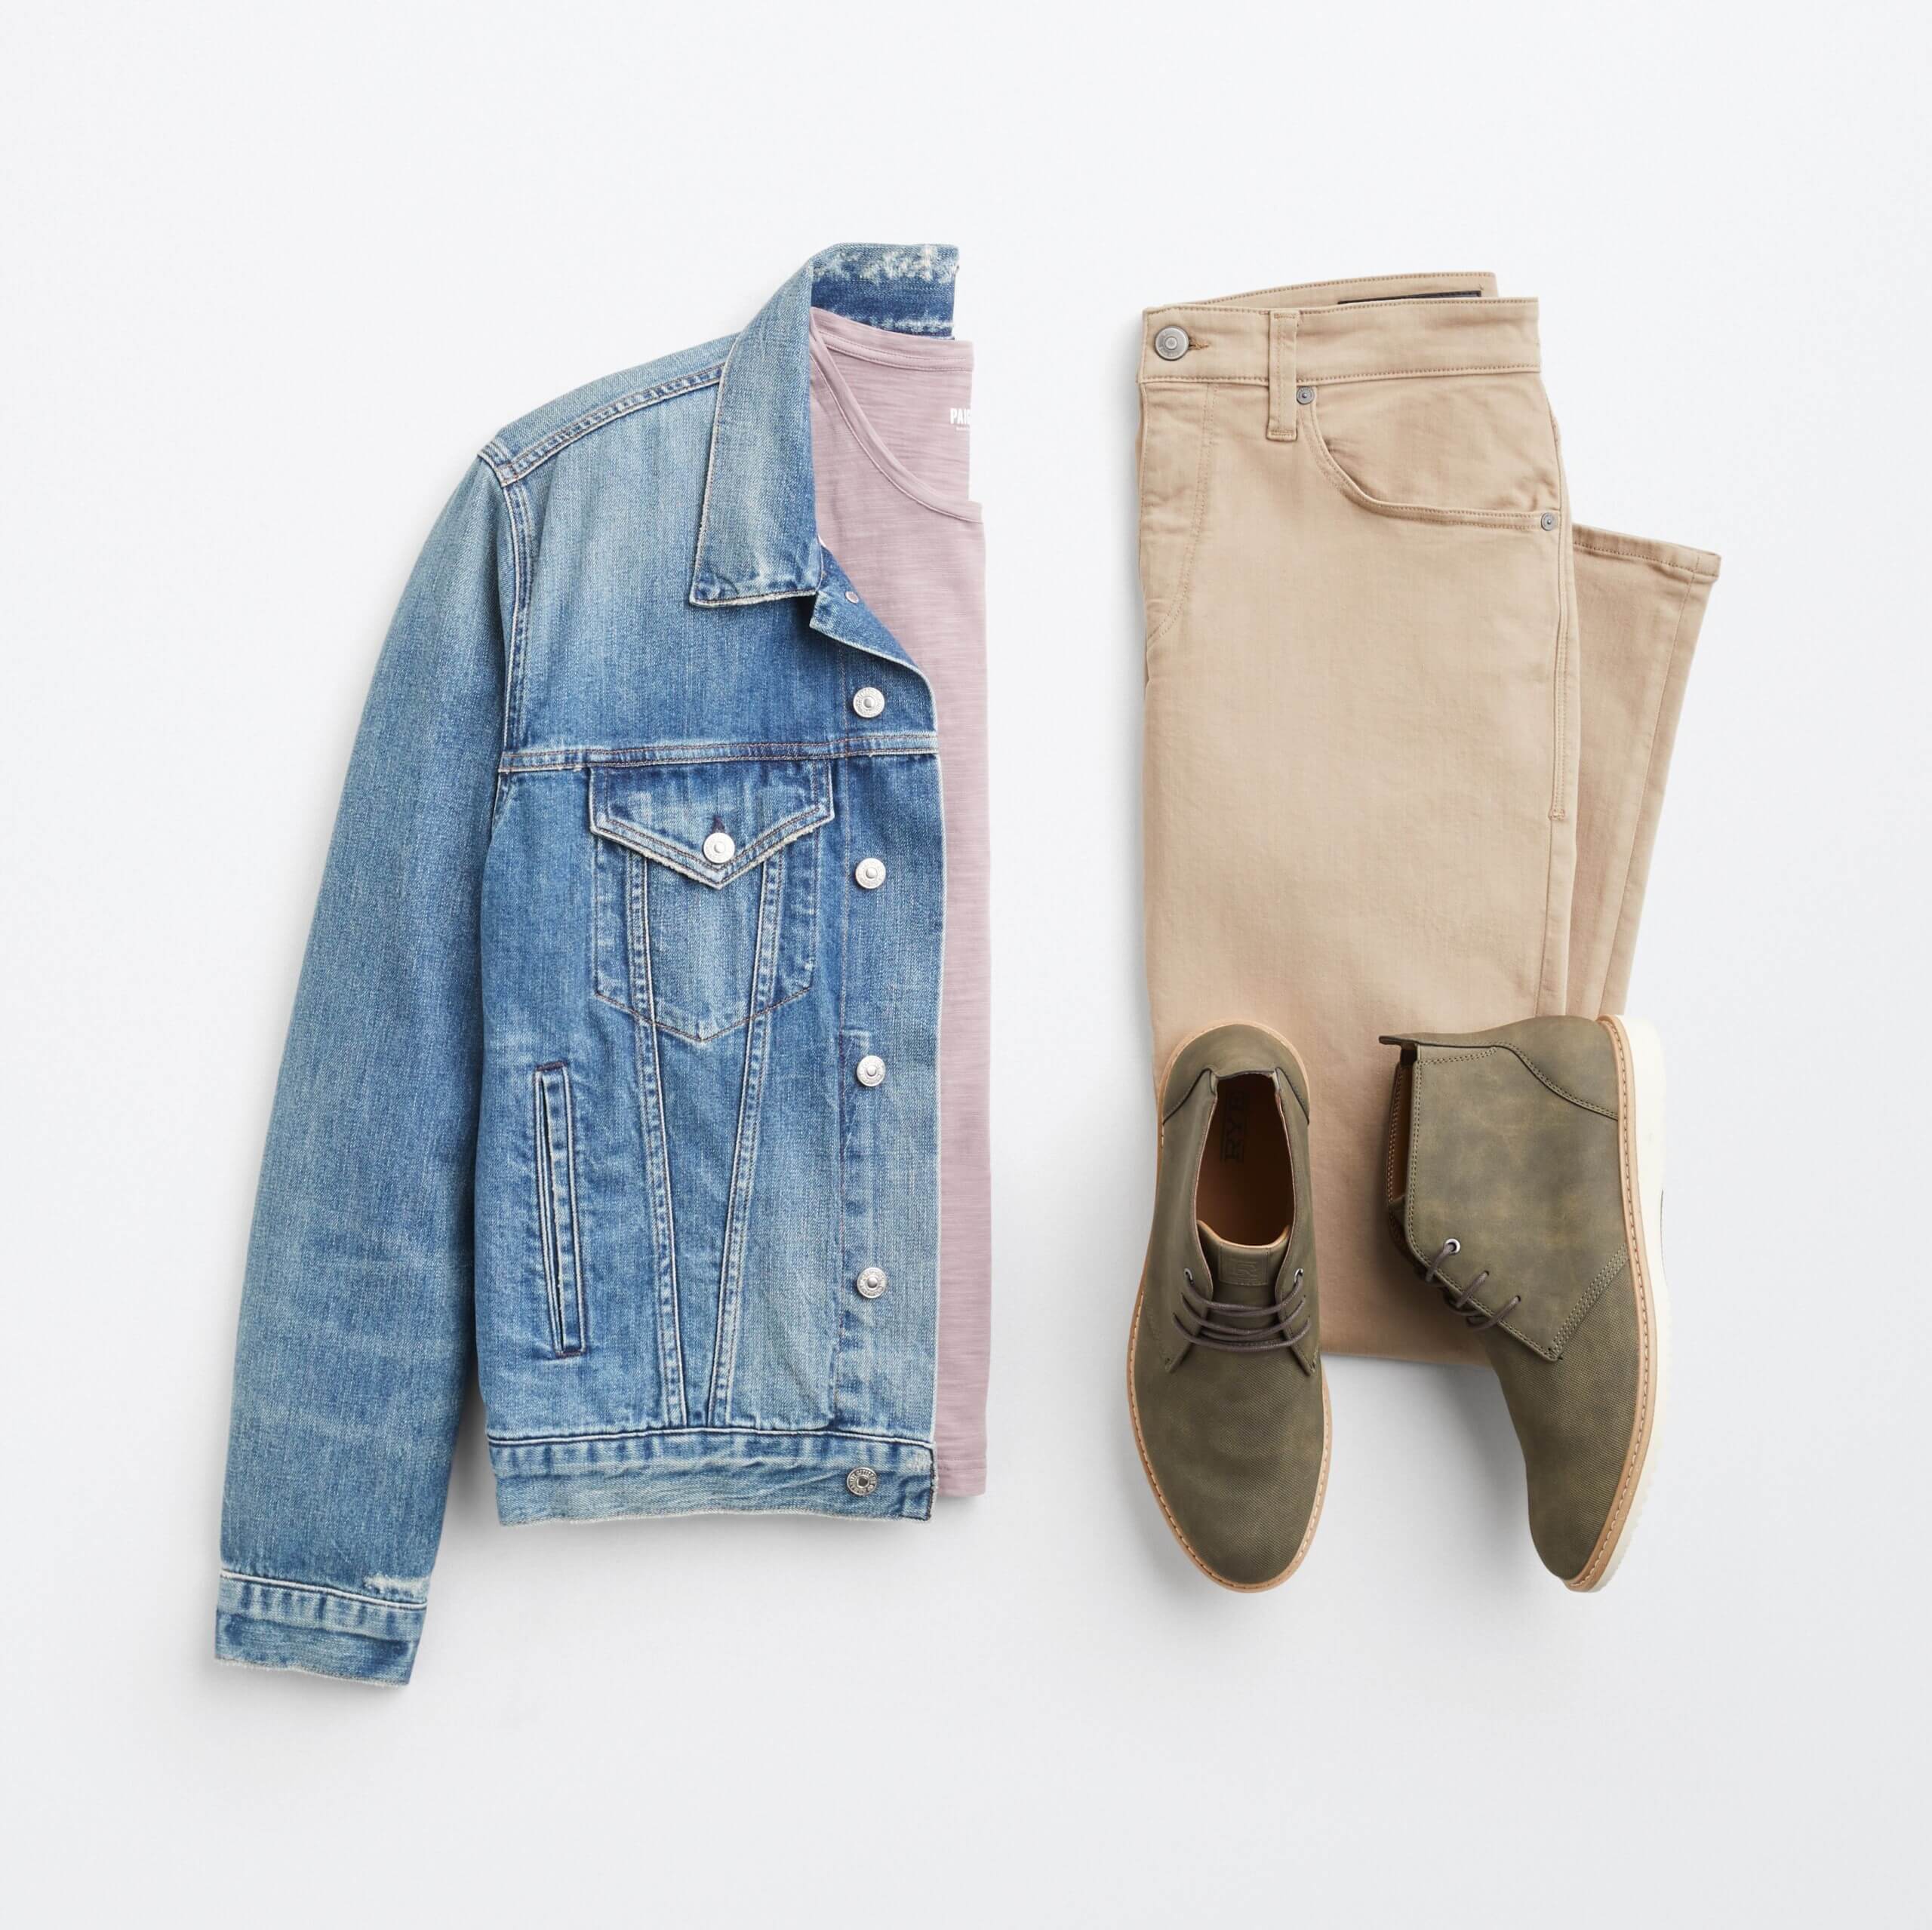 Stitch Fix men's outfit laydown featuring a denim jacket over a rose tee, khaki jeans and taupe chukkas.